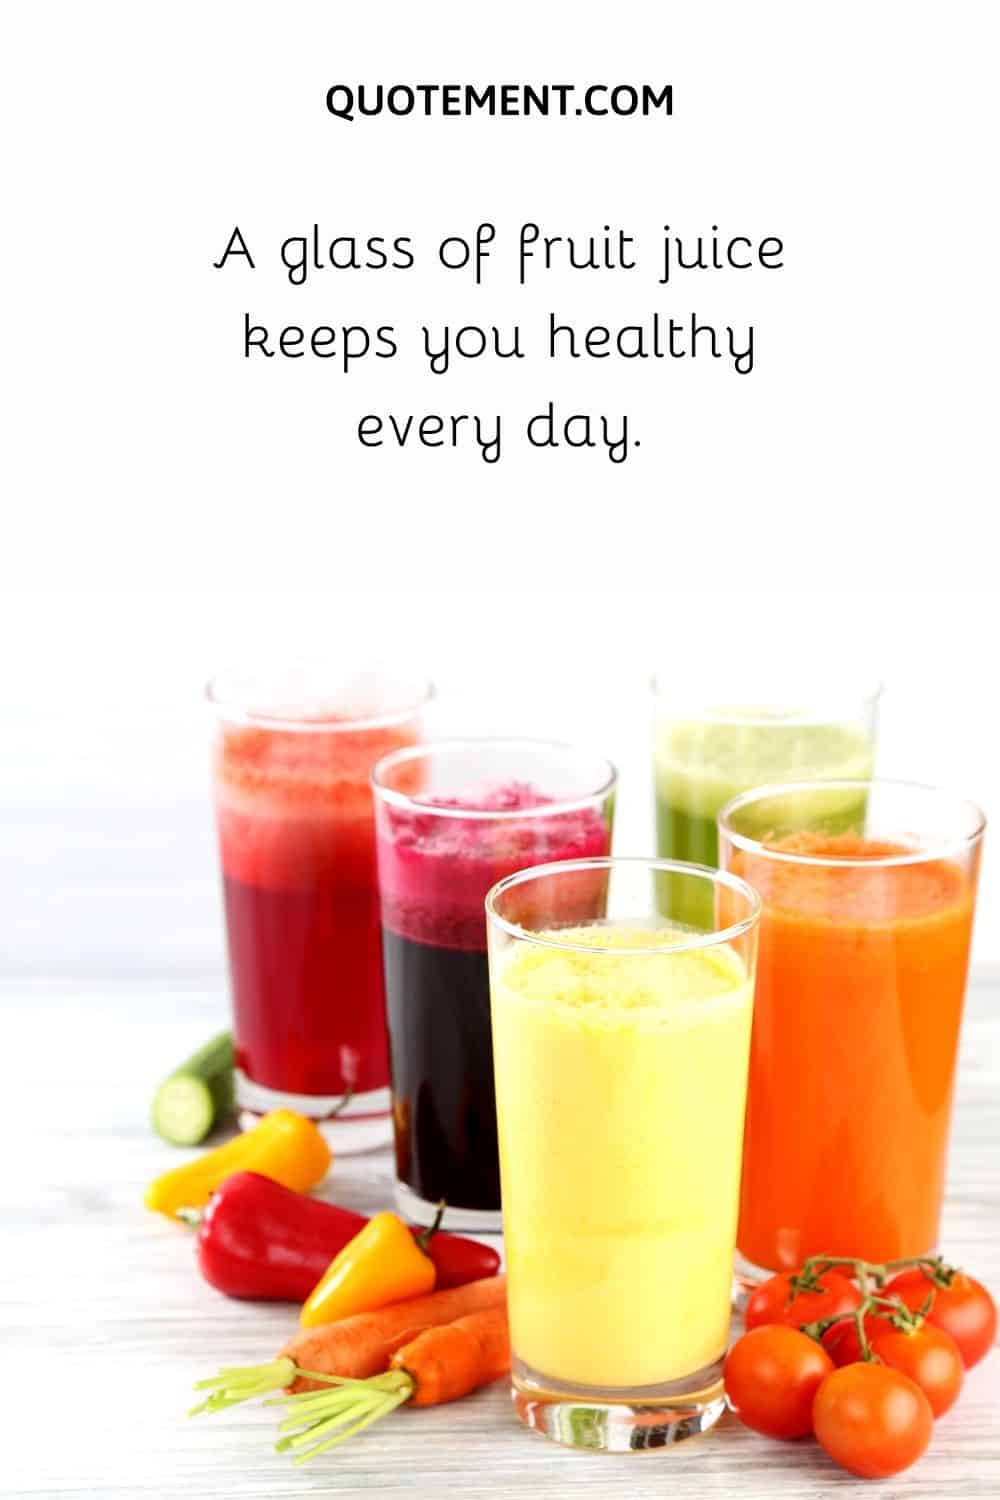 A glass of fruit juice keeps you healthy every day